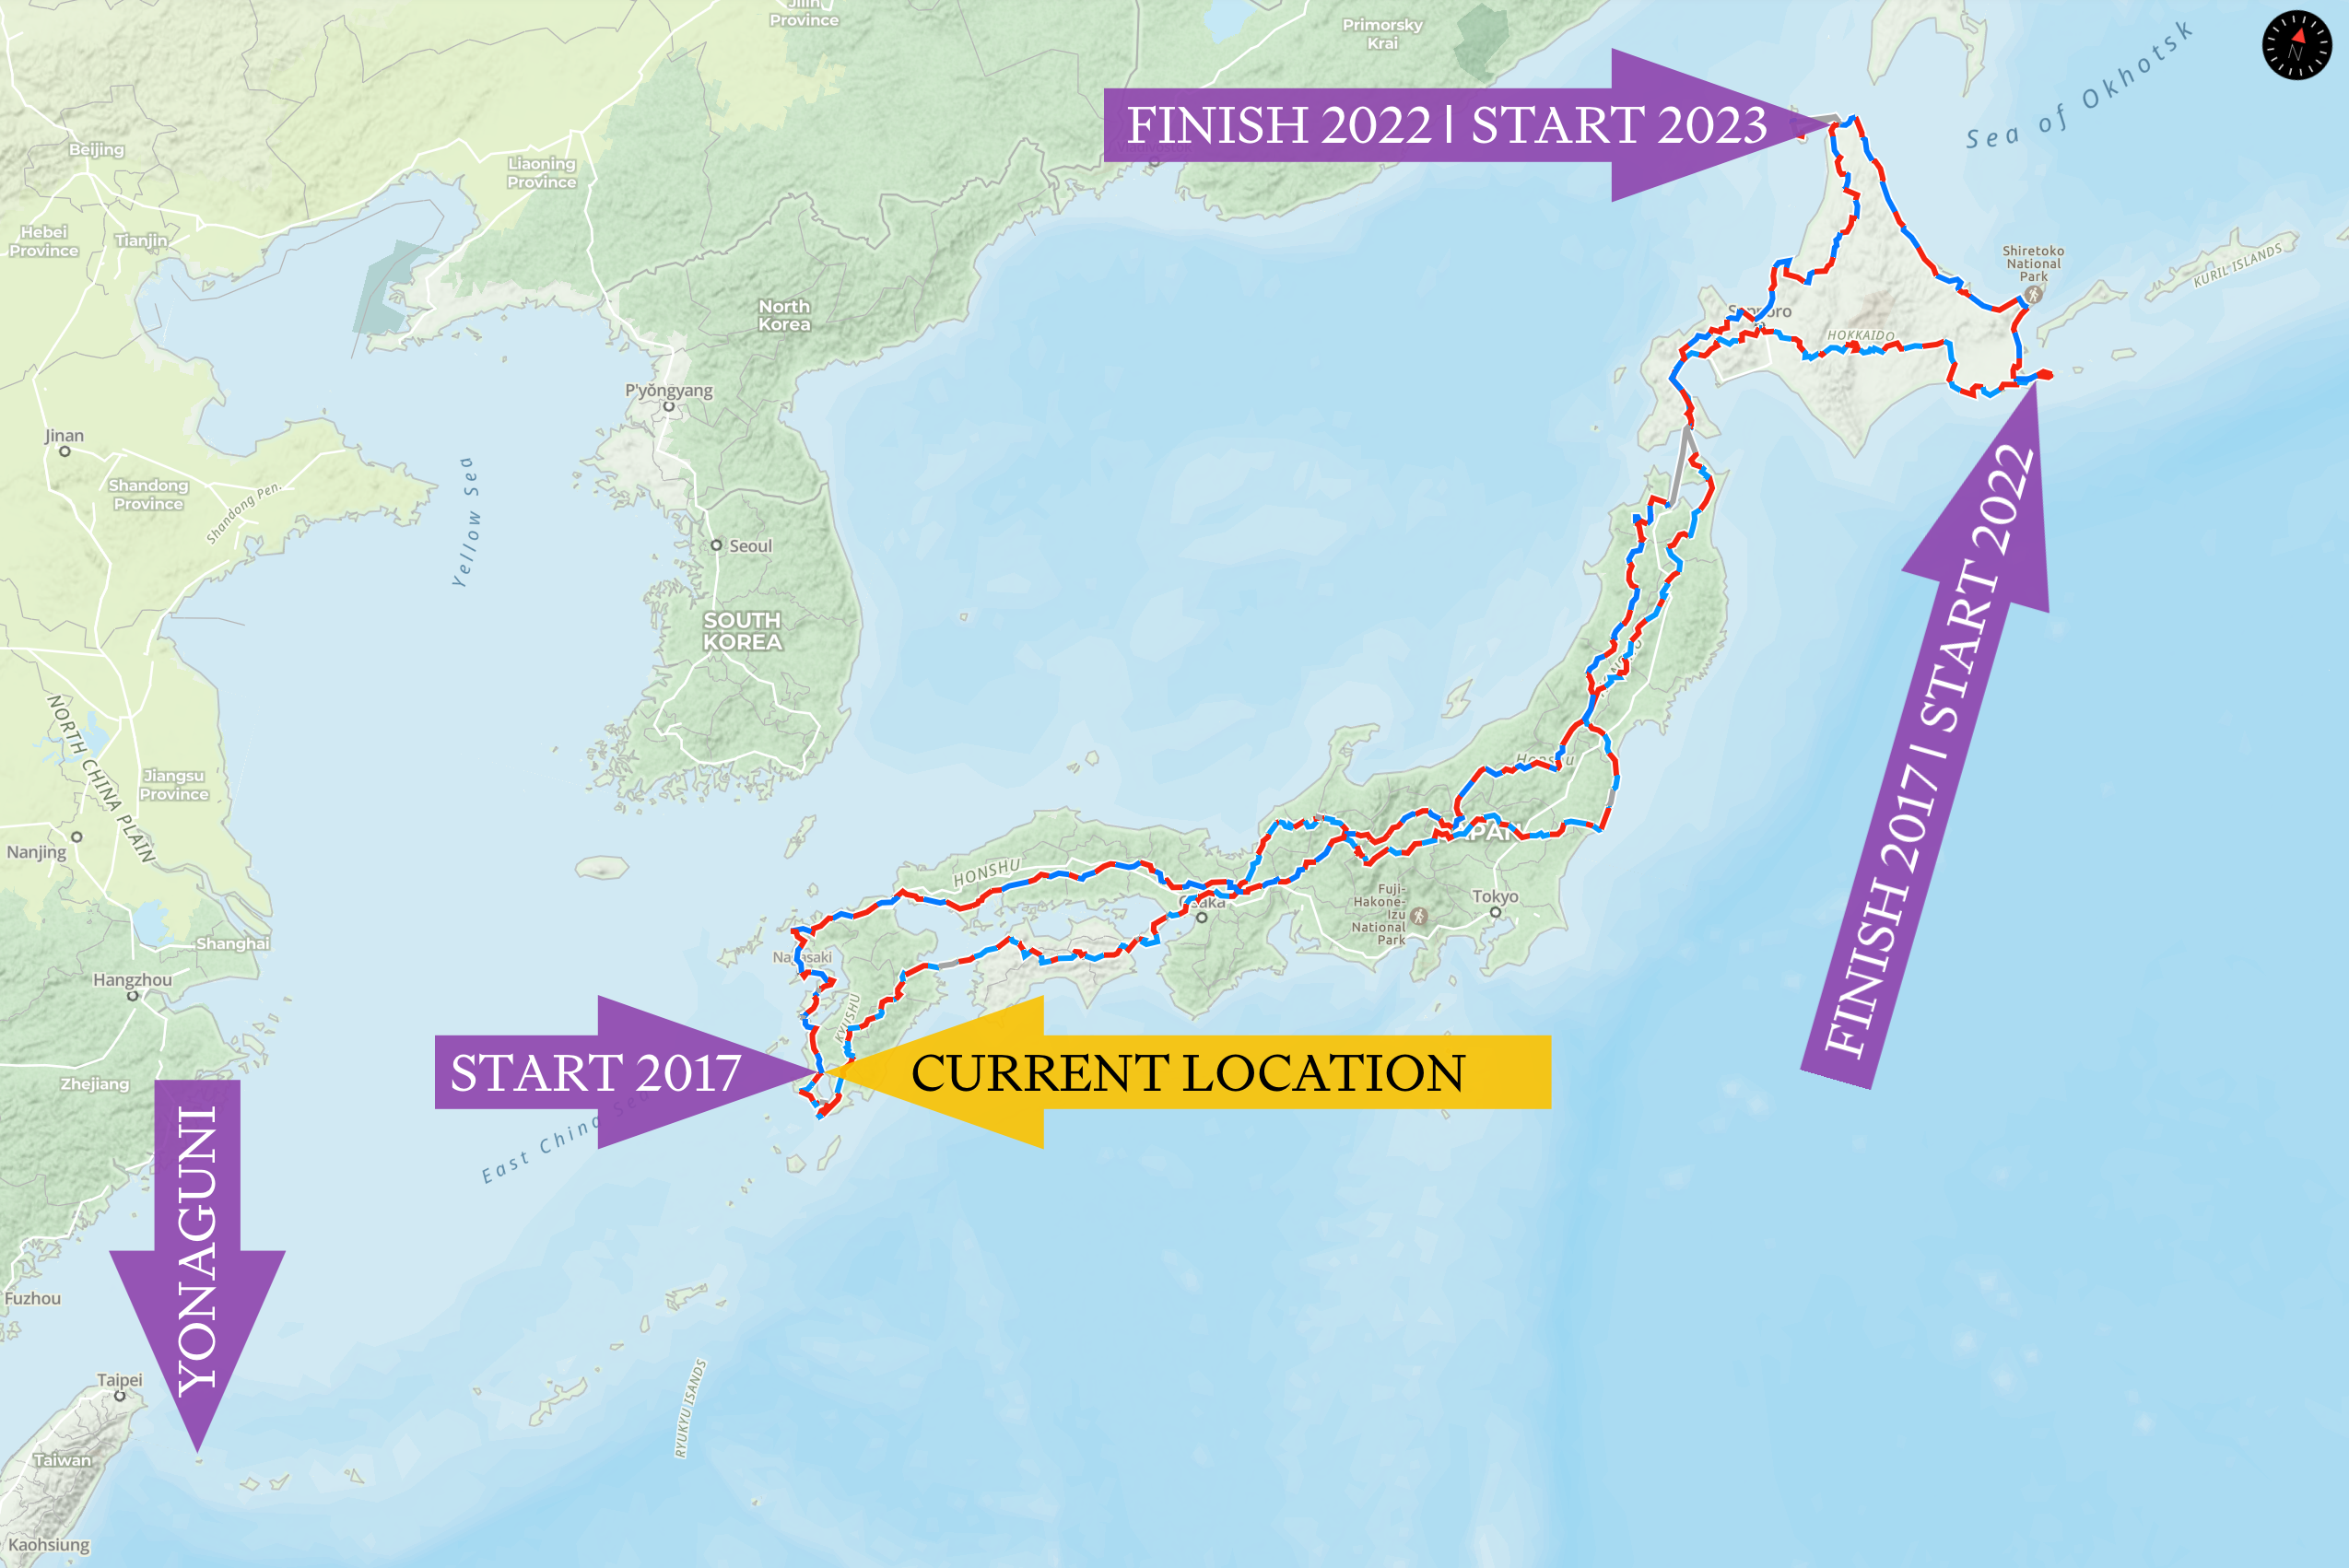 Map of Japan with my walking routes in 2017, 2022, and 2023 highlighted.